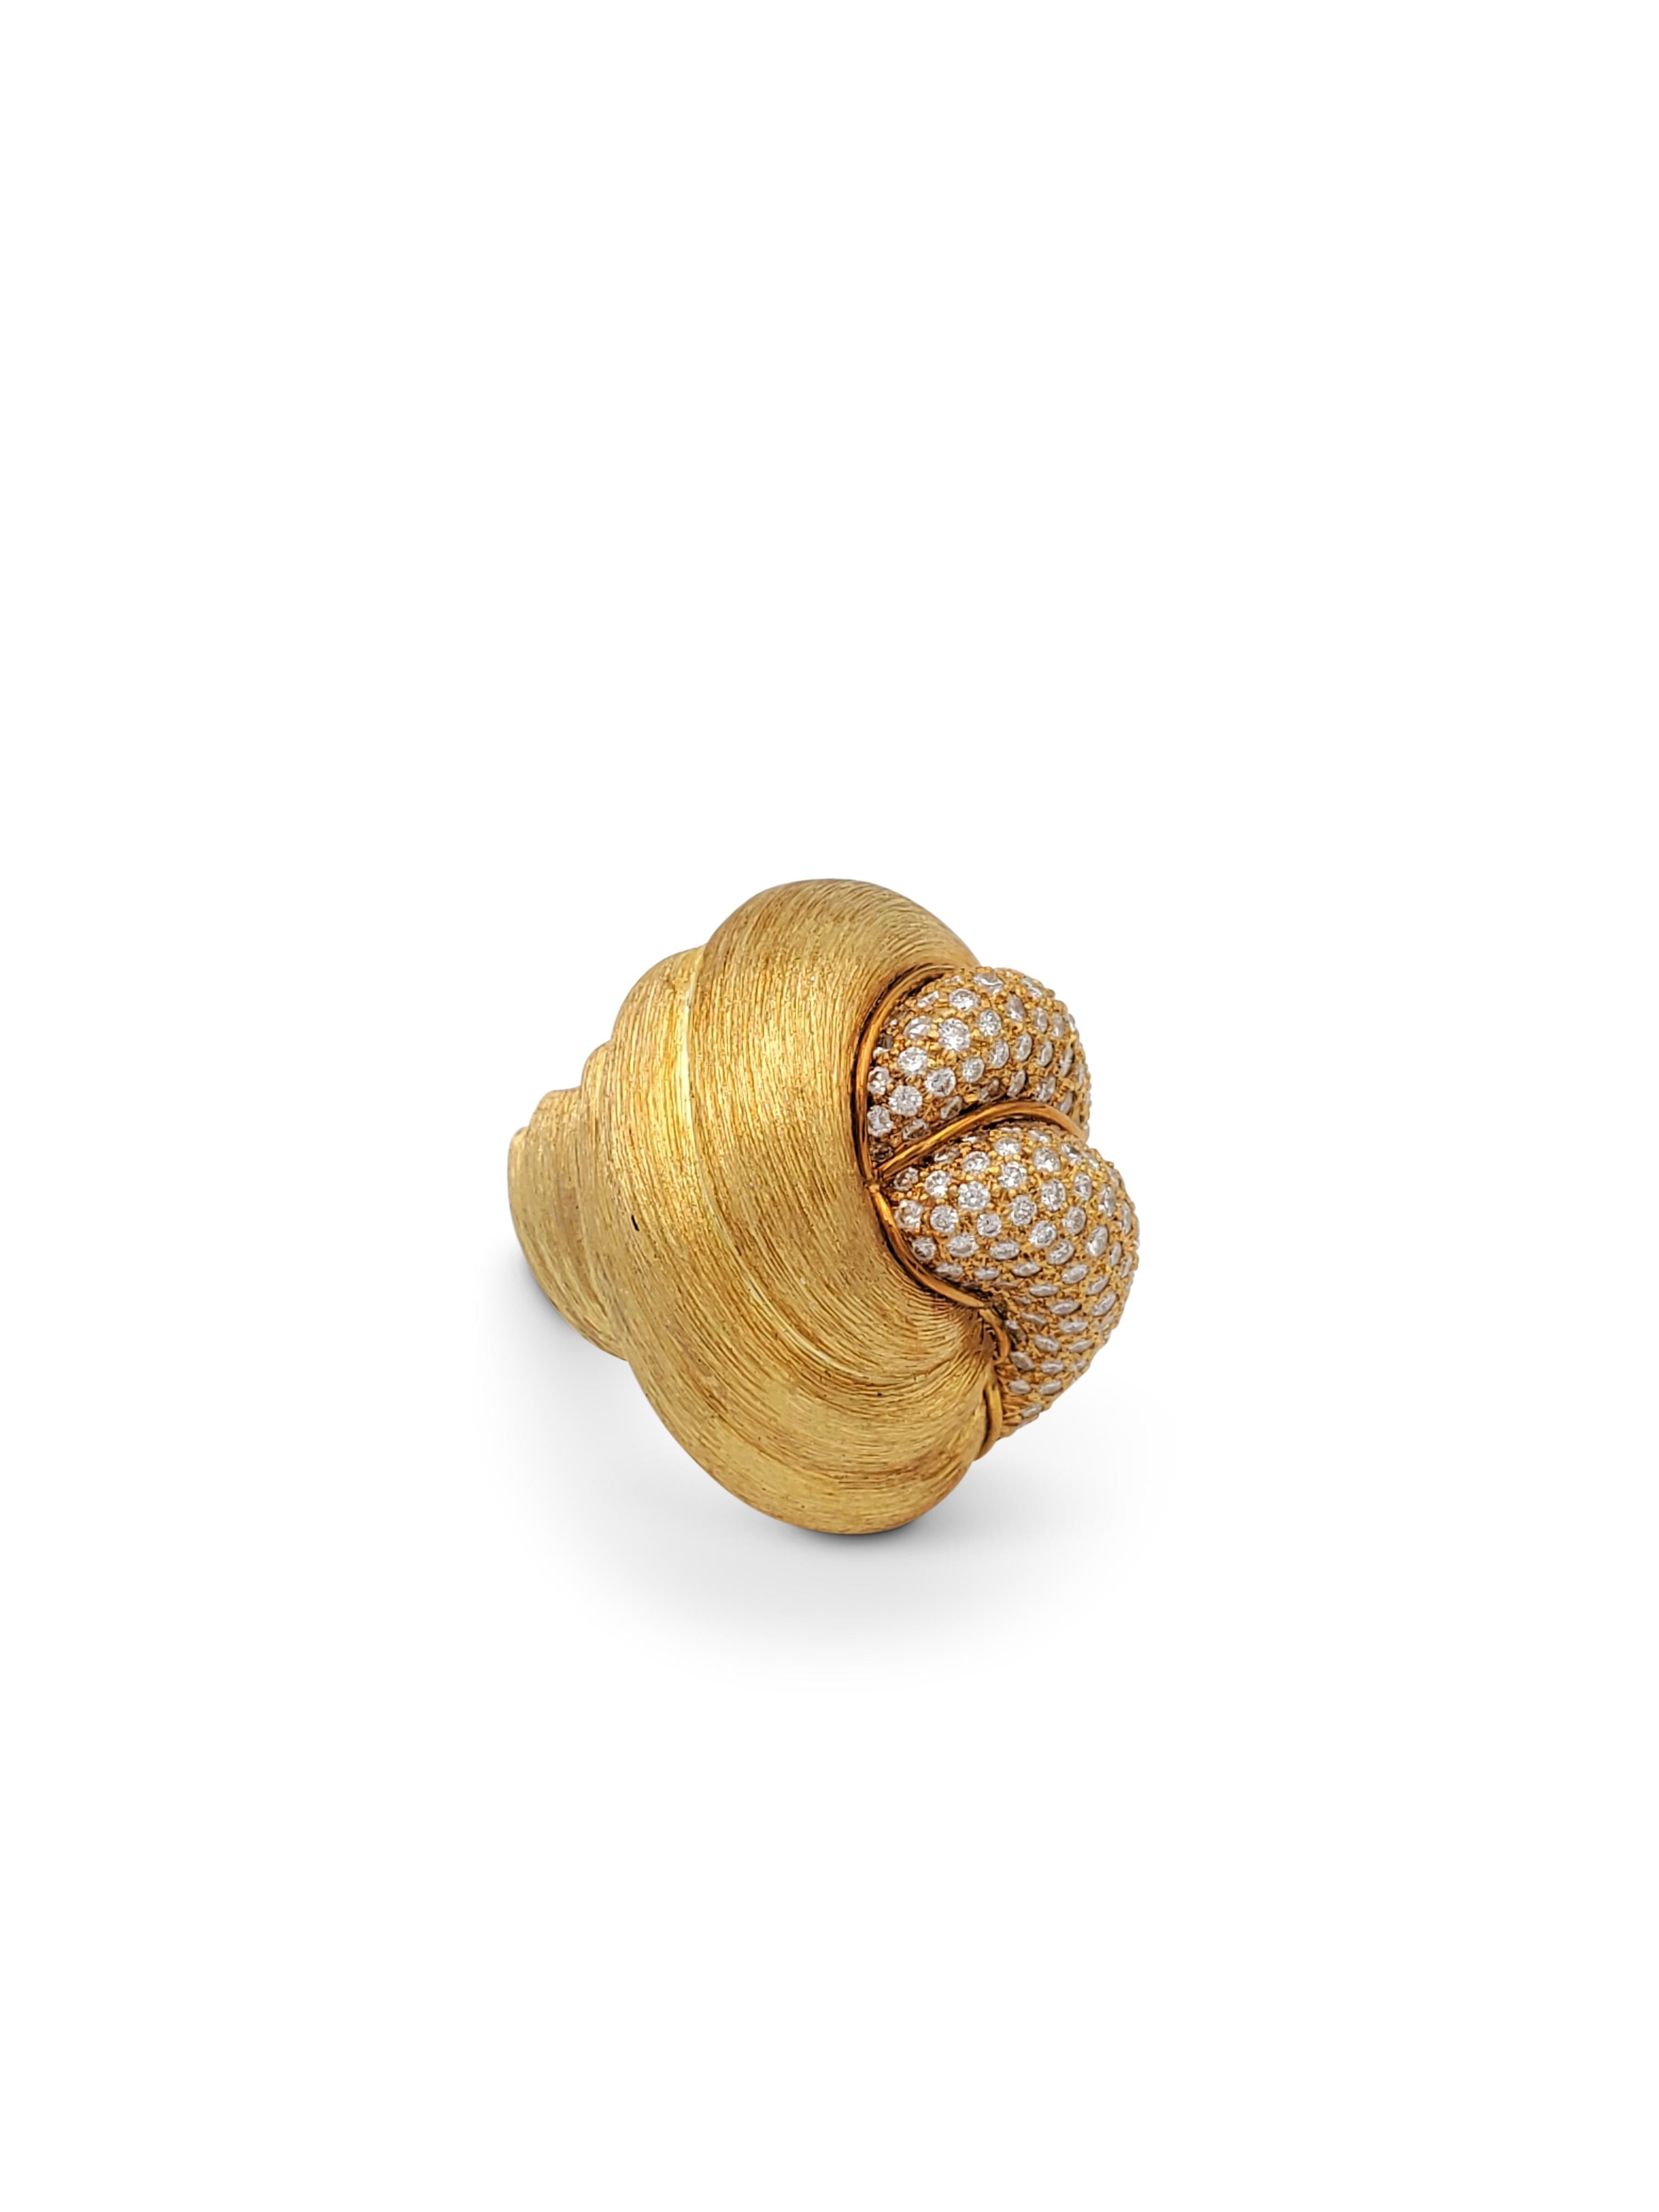 Round Cut Henry Dunay 'Sabi' Gold and Diamond Pave Ring